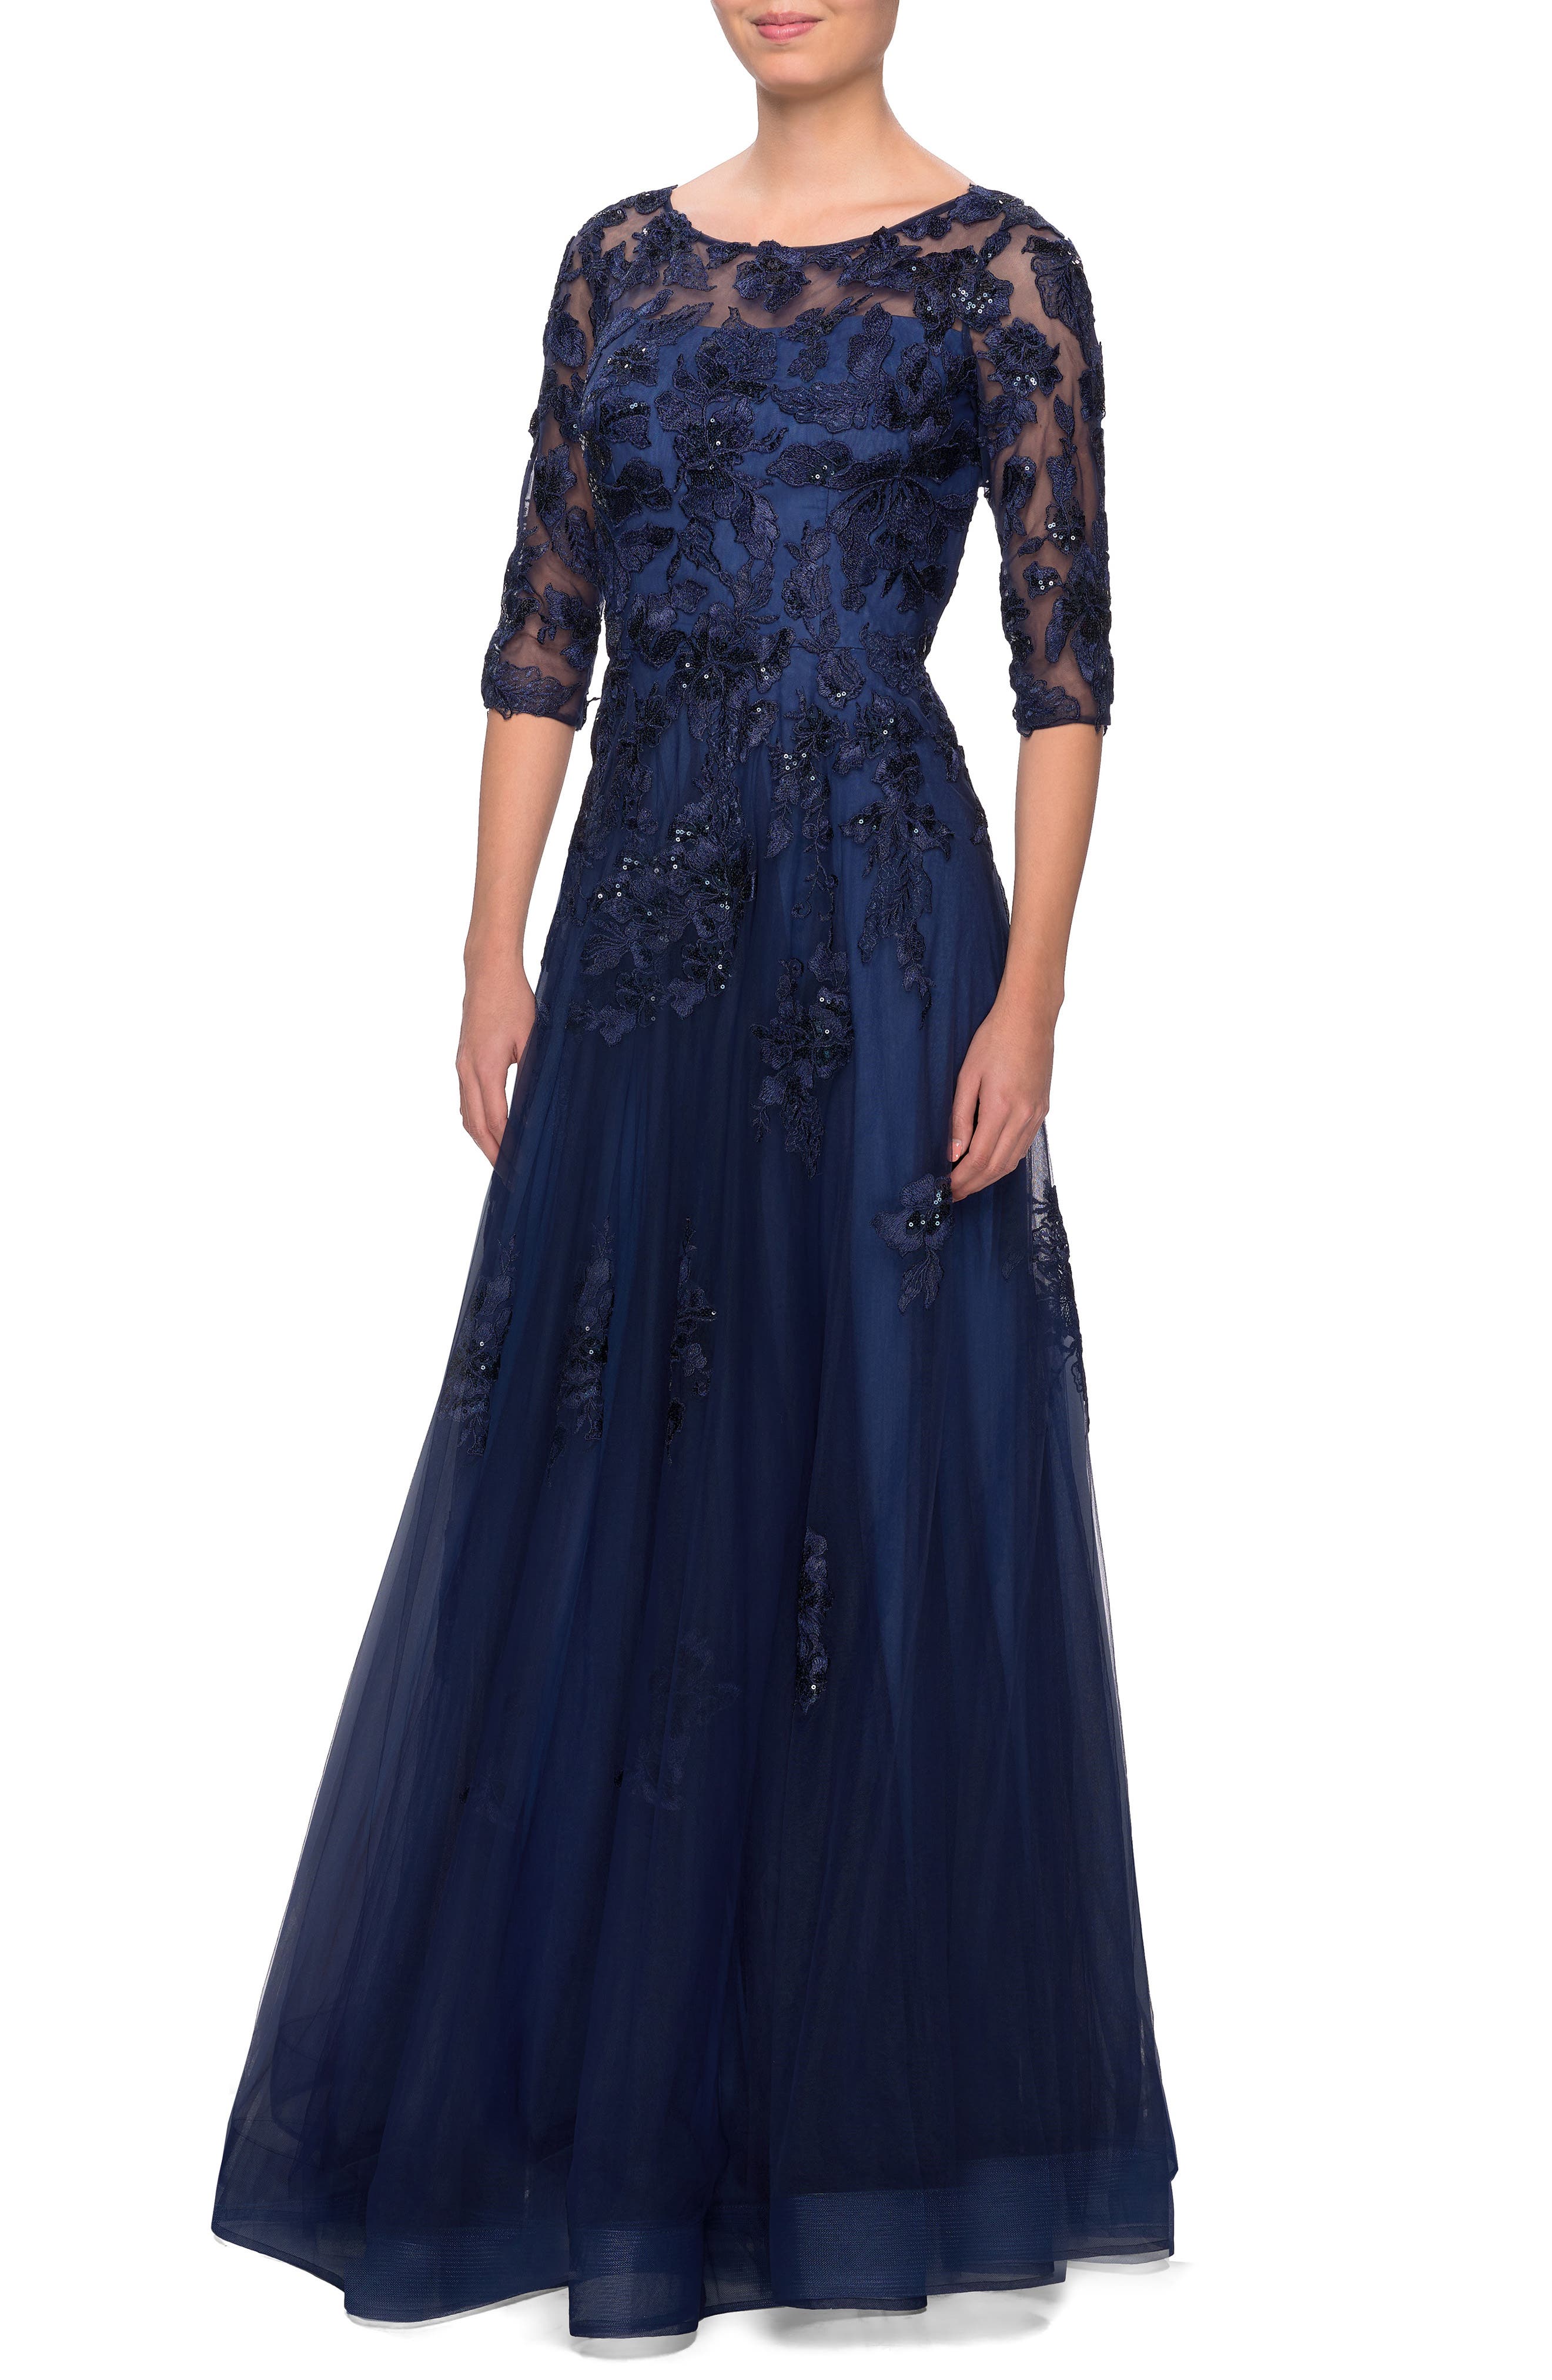 Blue Mother of the Bride Dresses ...